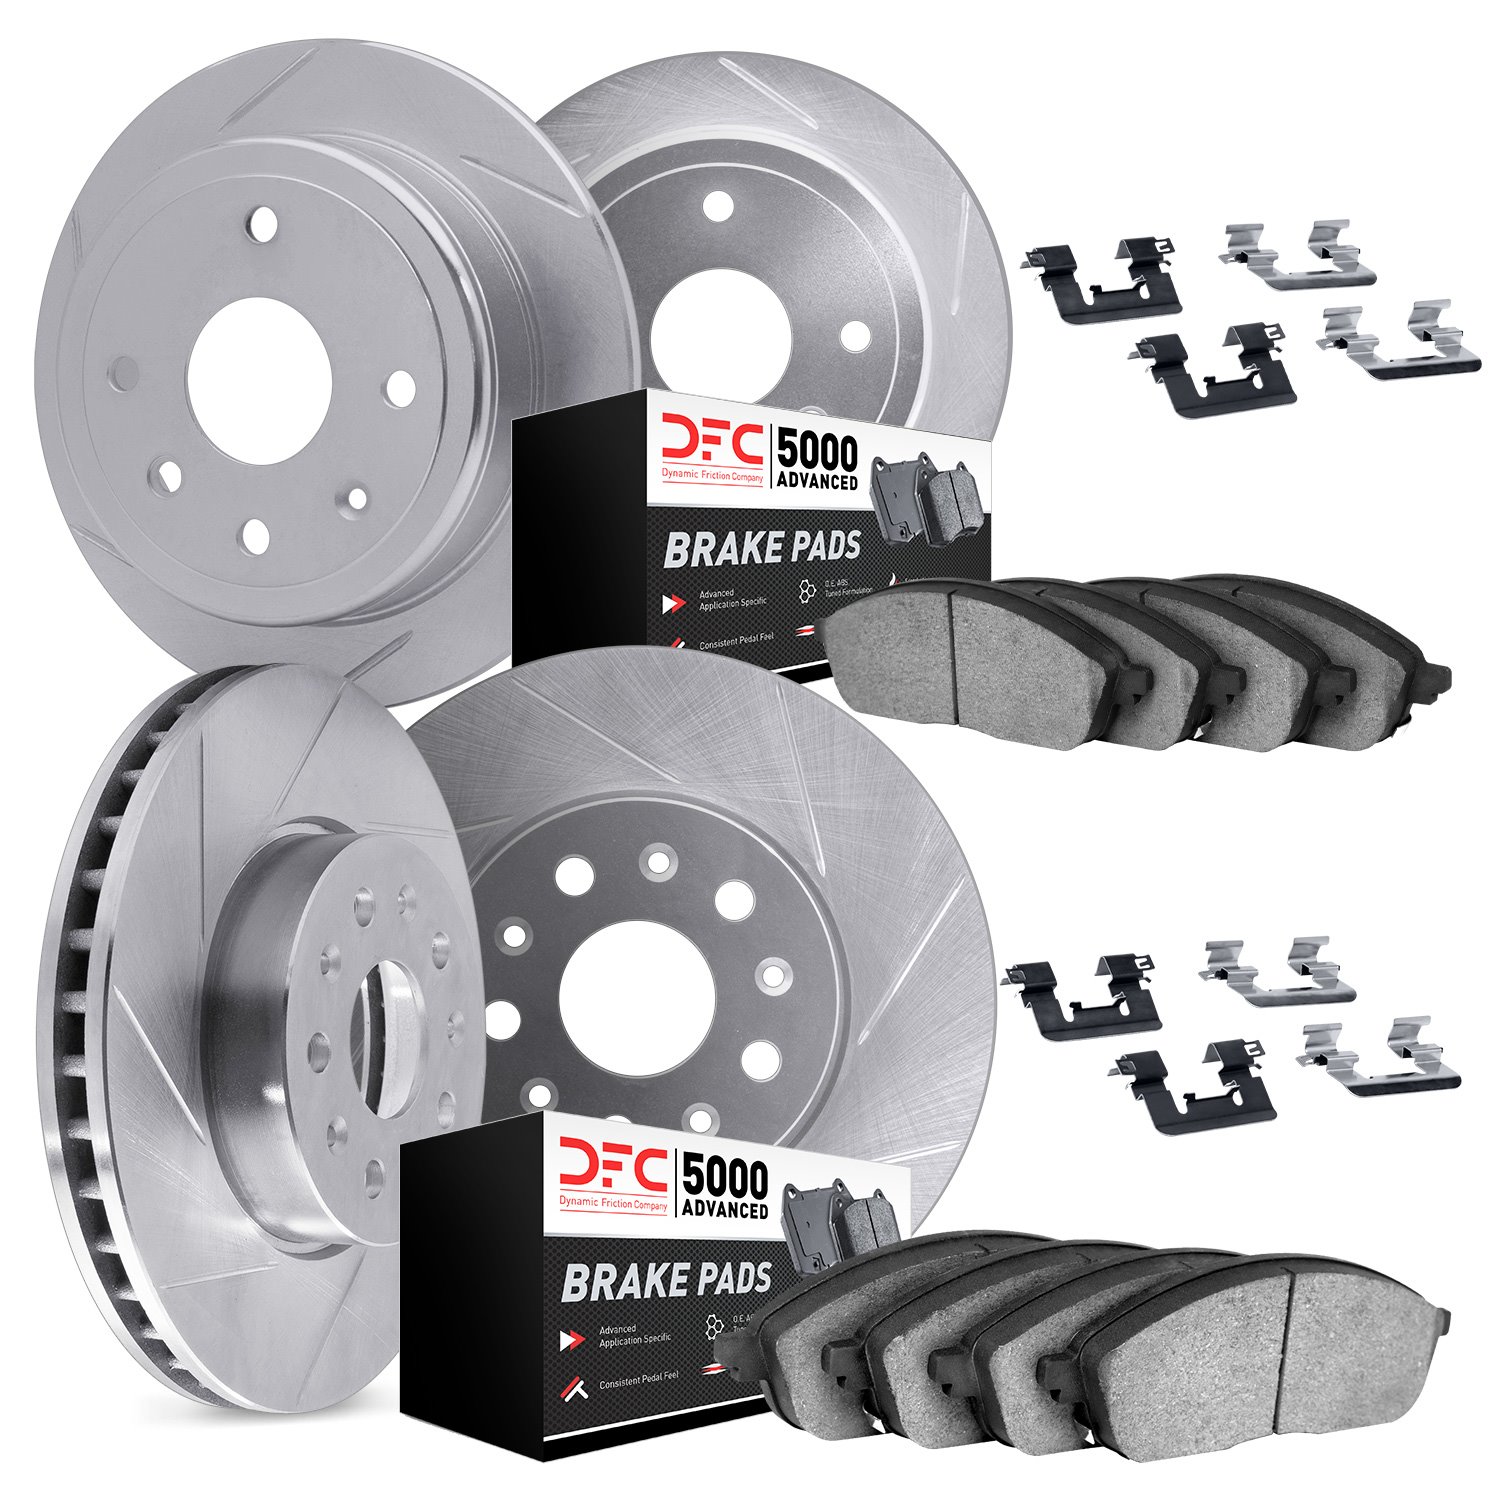 5514-11007 Slotted Brake Rotors w/5000 Advanced Brake Pads Kit & Hardware [Silver], 2003-2005 Land Rover, Position: Front and Re